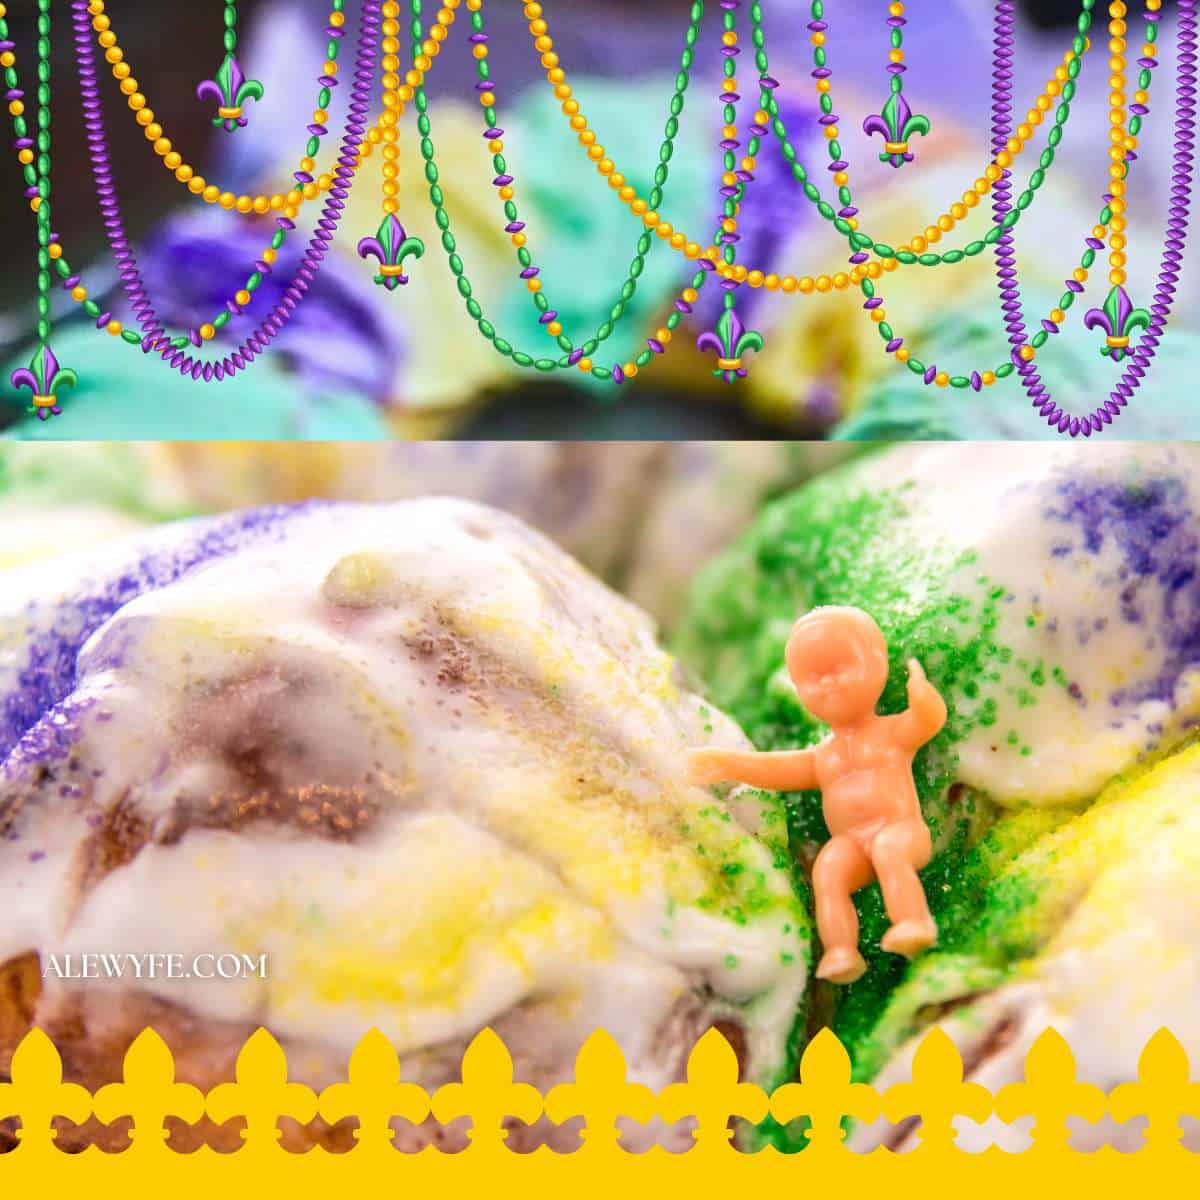 a ring-shaped king cake decorated with yellow, purple, and gold icing and colored sugar. Cartoon text says, "king cake" with a fleur-de-lis, and a banner of mardi gras beads hangs from the top of the image.